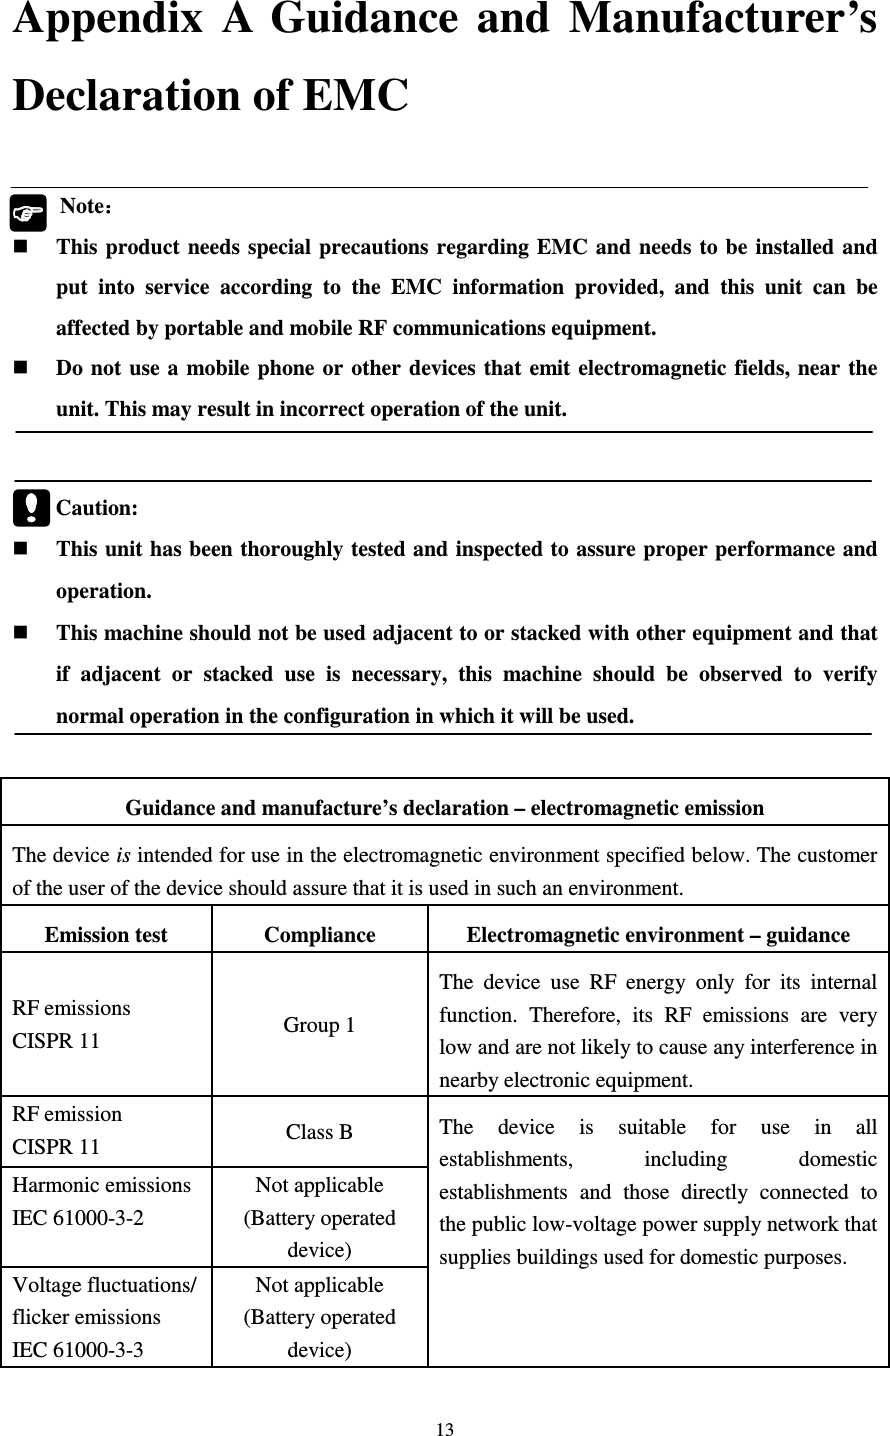 13 Appendix  A  Guidance  and  Manufacturer’s Declaration of EMC       Note：：：：  This product needs  special precautions regarding EMC and  needs to be  installed and put  into  service  according  to  the  EMC  information  provided,  and  this  unit  can  be affected by portable and mobile RF communications equipment.  Do not  use a  mobile phone or other  devices  that  emit electromagnetic fields, near the unit. This may result in incorrect operation of the unit.     Caution:    This unit has been thoroughly tested and inspected to assure proper performance and operation.  This machine should not be used adjacent to or stacked with other equipment and that if  adjacent  or  stacked  use  is  necessary,  this  machine  should  be  observed  to  verify normal operation in the configuration in which it will be used.  Guidance and manufacture’s declaration – electromagnetic emission The device is intended for use in the electromagnetic environment specified below. The customer of the user of the device should assure that it is used in such an environment. Emission test  Compliance  Electromagnetic environment – guidance RF emissions CISPR 11  Group 1 The  device use  RF  energy  only  for  its  internal function.  Therefore,  its  RF  emissions  are  very low and are not likely to cause any interference in nearby electronic equipment. RF emission CISPR 11  Class B  The  device  is  suitable  for  use  in  all establishments,  including  domestic establishments  and  those  directly  connected  to the public low-voltage power supply network that supplies buildings used for domestic purposes. Harmonic emissions IEC 61000-3-2 Not applicable (Battery operated device) Voltage fluctuations/ flicker emissions IEC 61000-3-3 Not applicable (Battery operated device)  